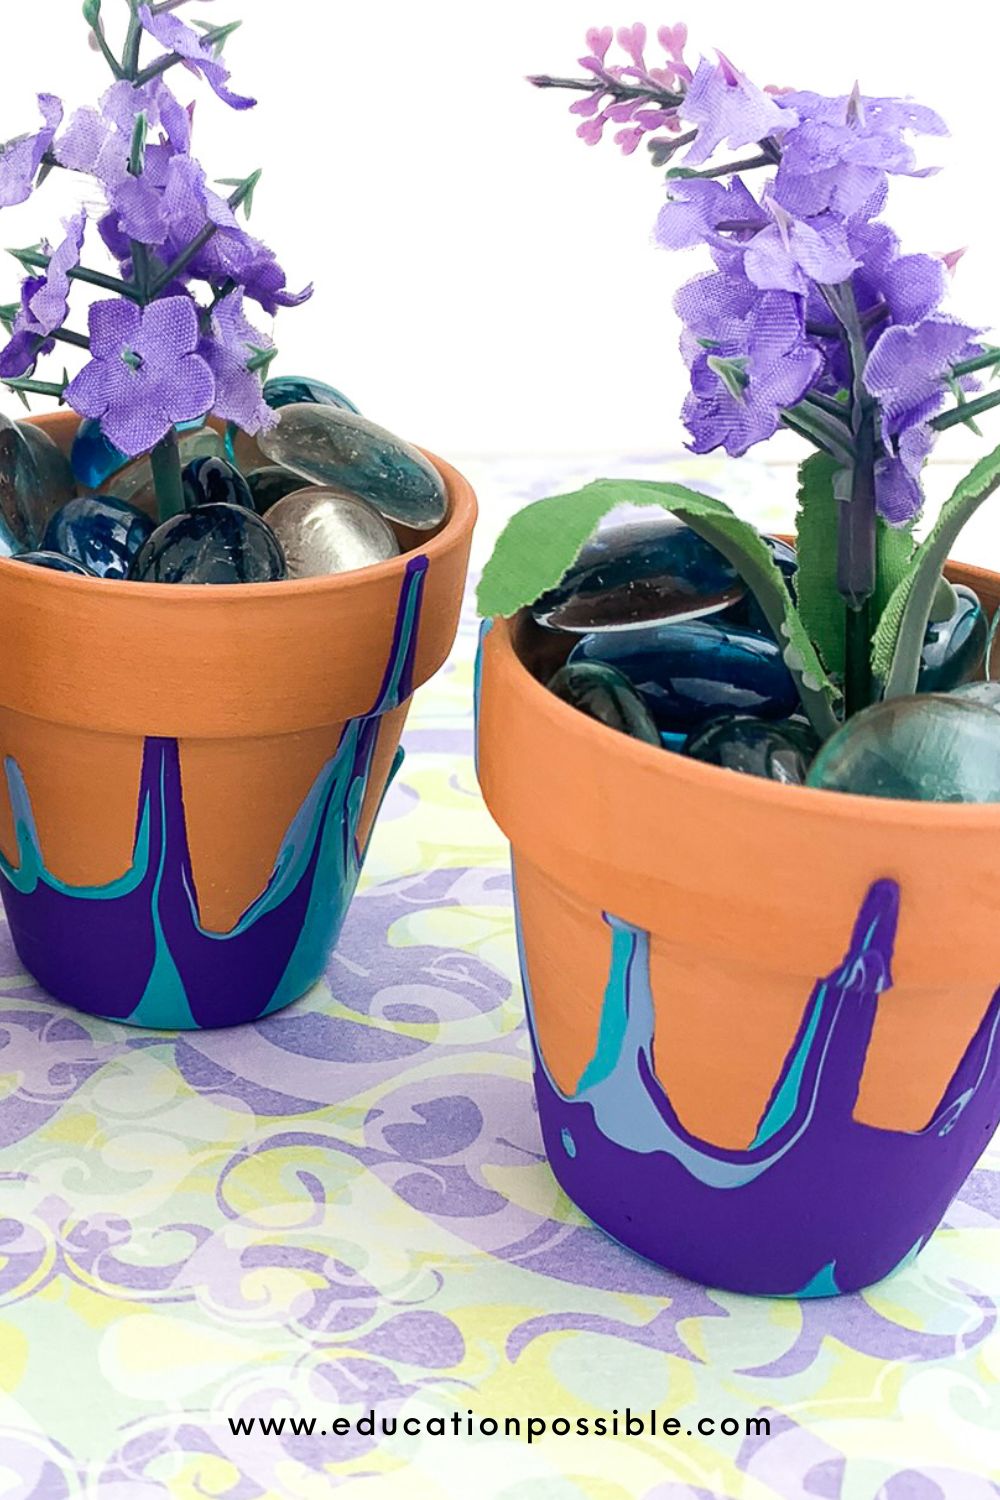 Two DIY pour paint flower pots on a purple/green patterned fabric. Pots filled with light purple silk flowers and glass beads.